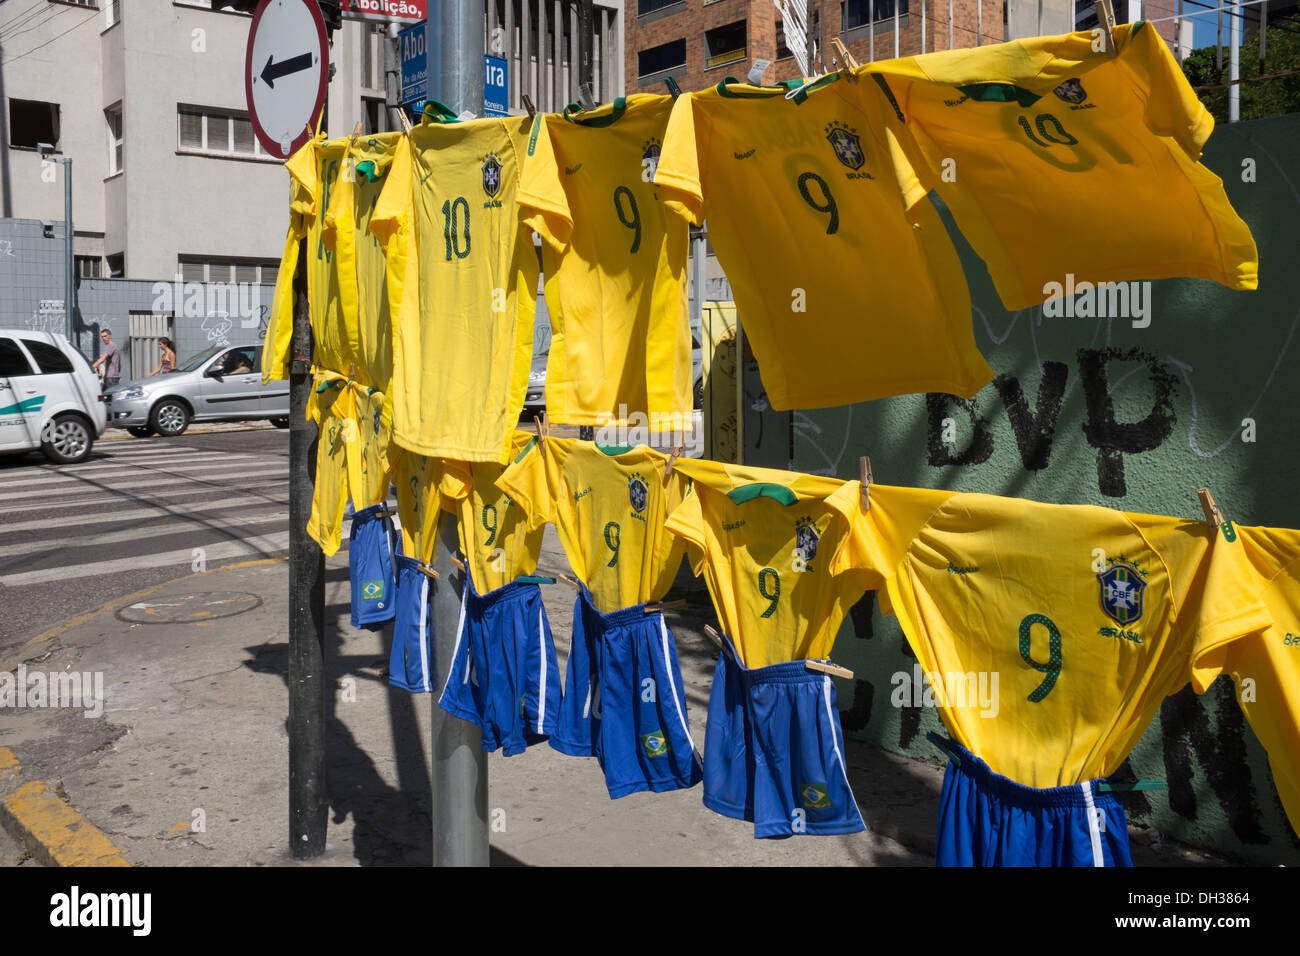 Brazil football shirts and shorts in national football soccer colours on sale on a street before a match, Fortaleza, Brazil Stock Photo